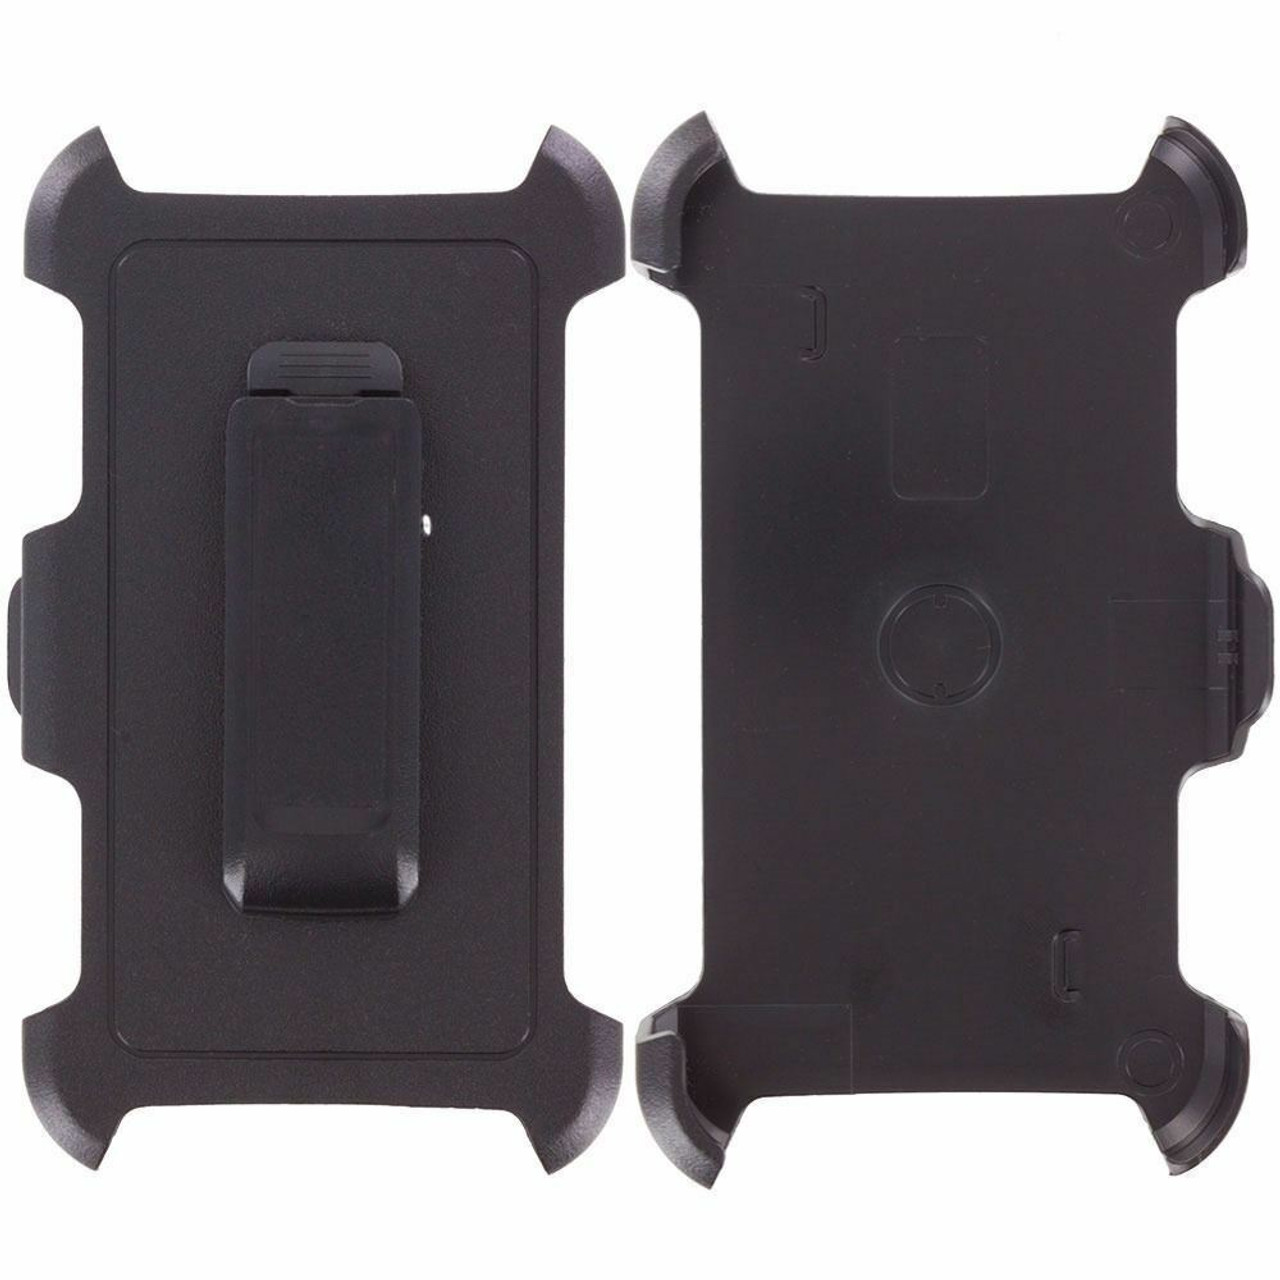 Belt Clip Holster Replacement Fits Samsung Galaxy S7 Otterbox Defender Case USA